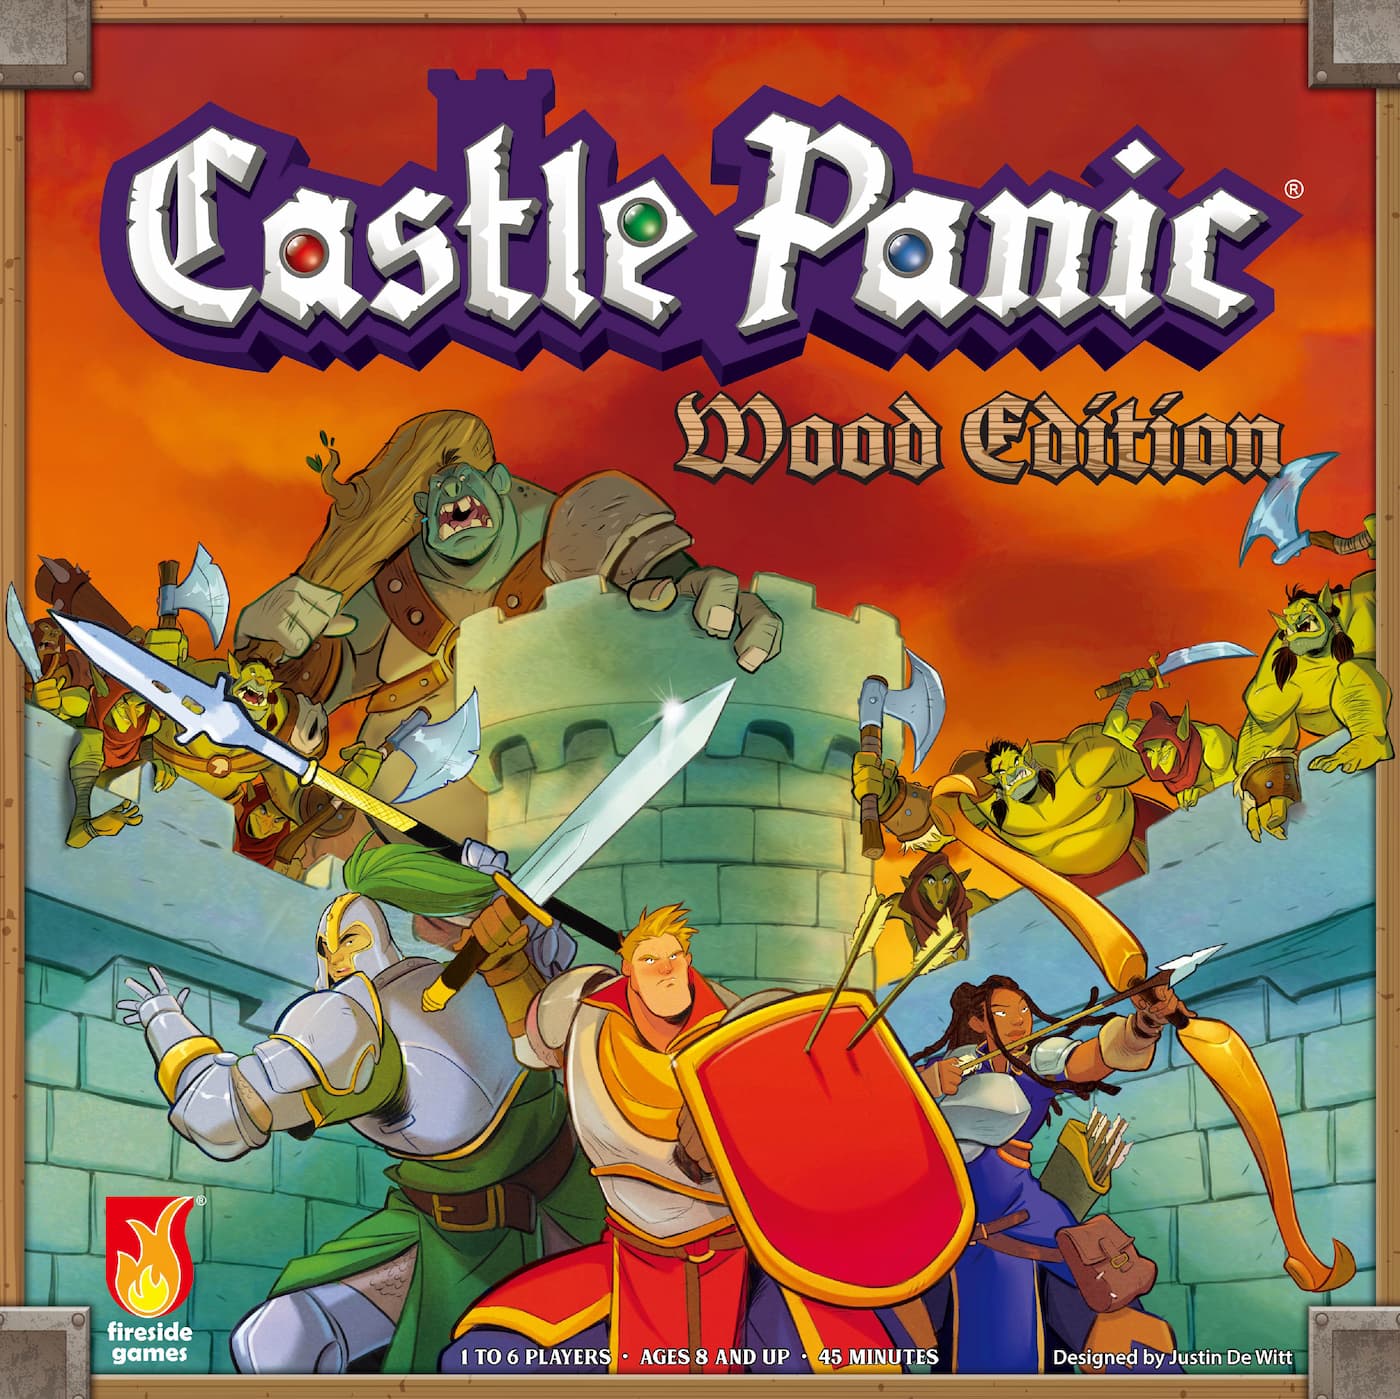 Castle Panic Wood Edition the board game was manufactured by Boda Games Manufacturing.